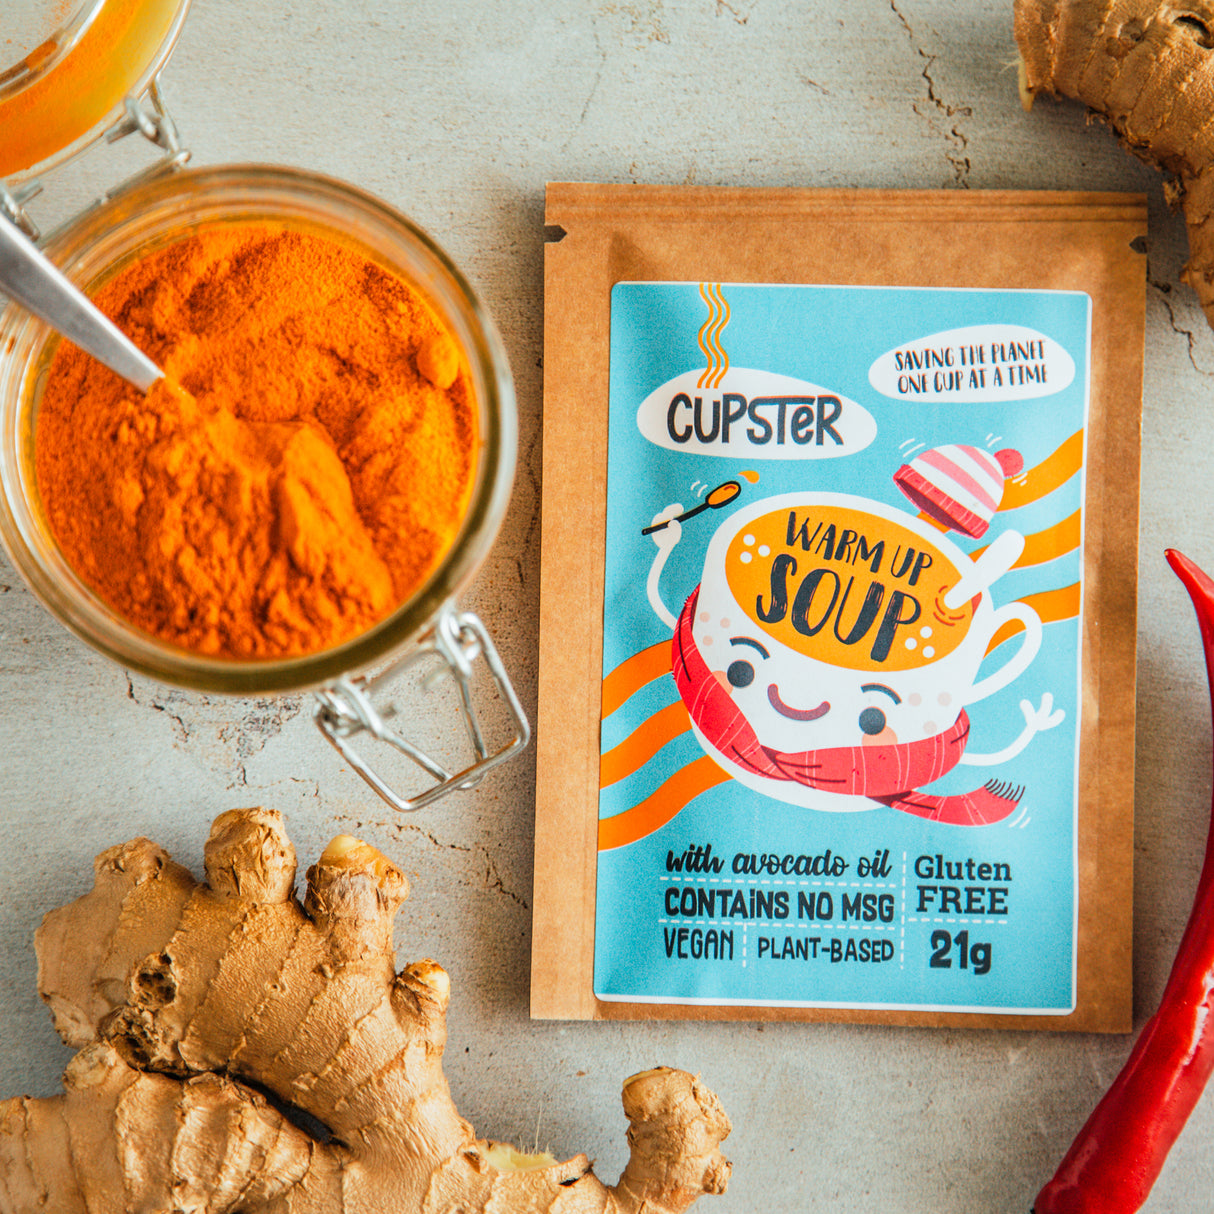 Cupster instant warm up soup 21g